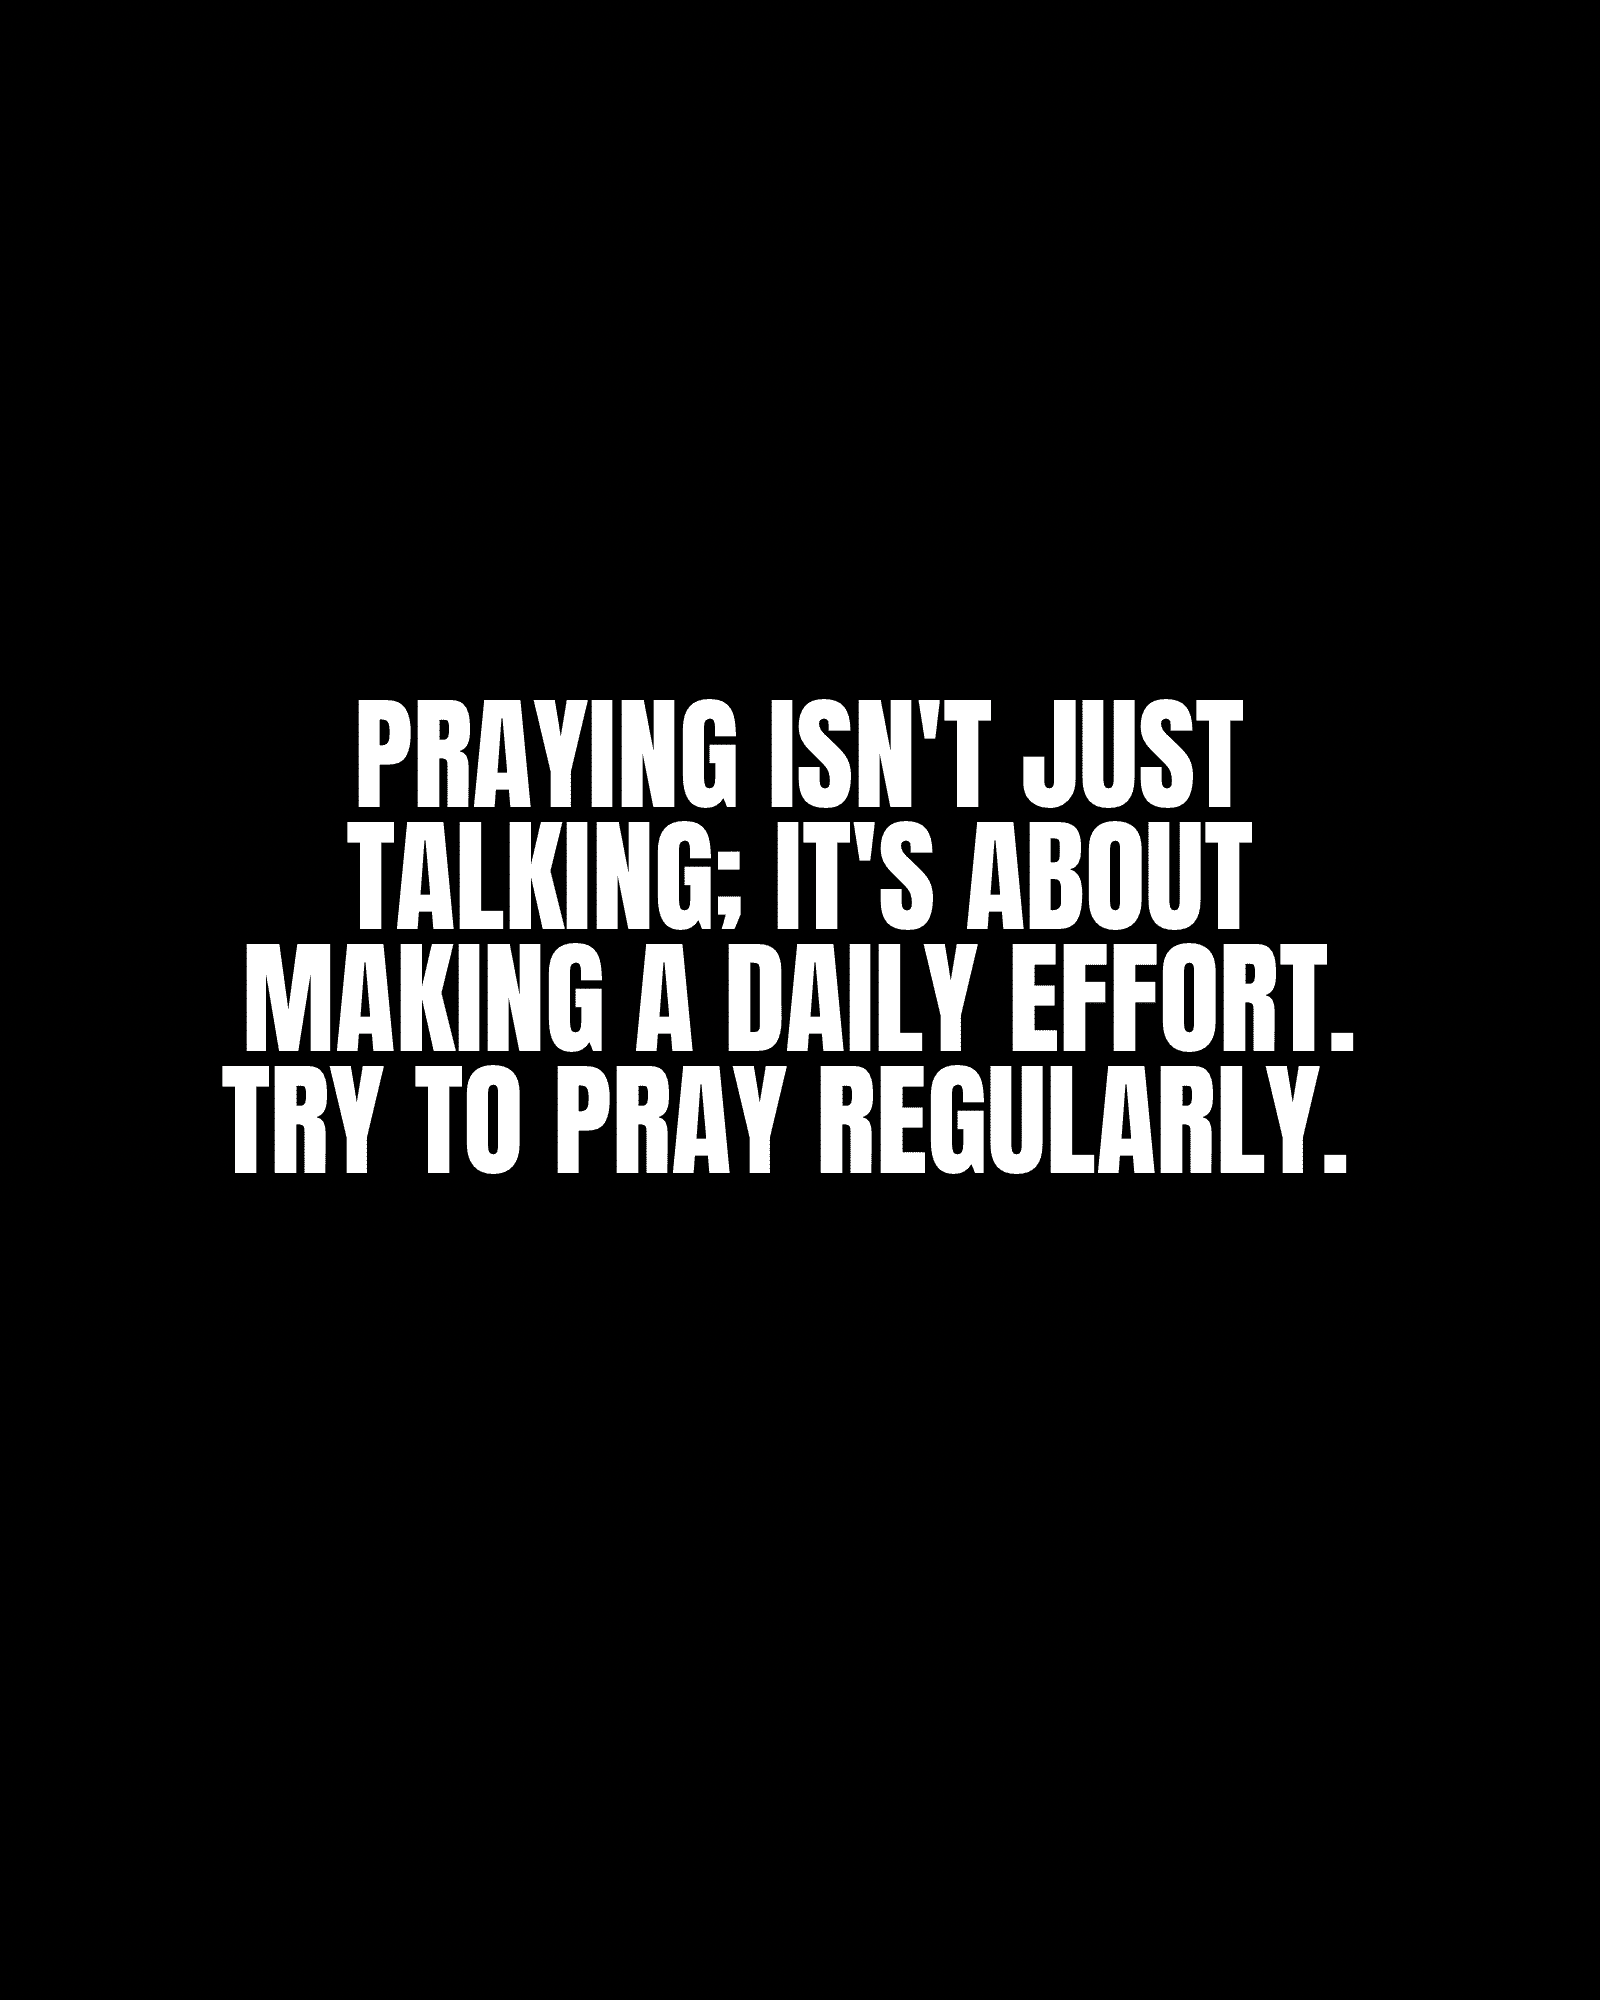 Praying isn’t just talking; it’s about making a daily effort. Try to pray regularly.